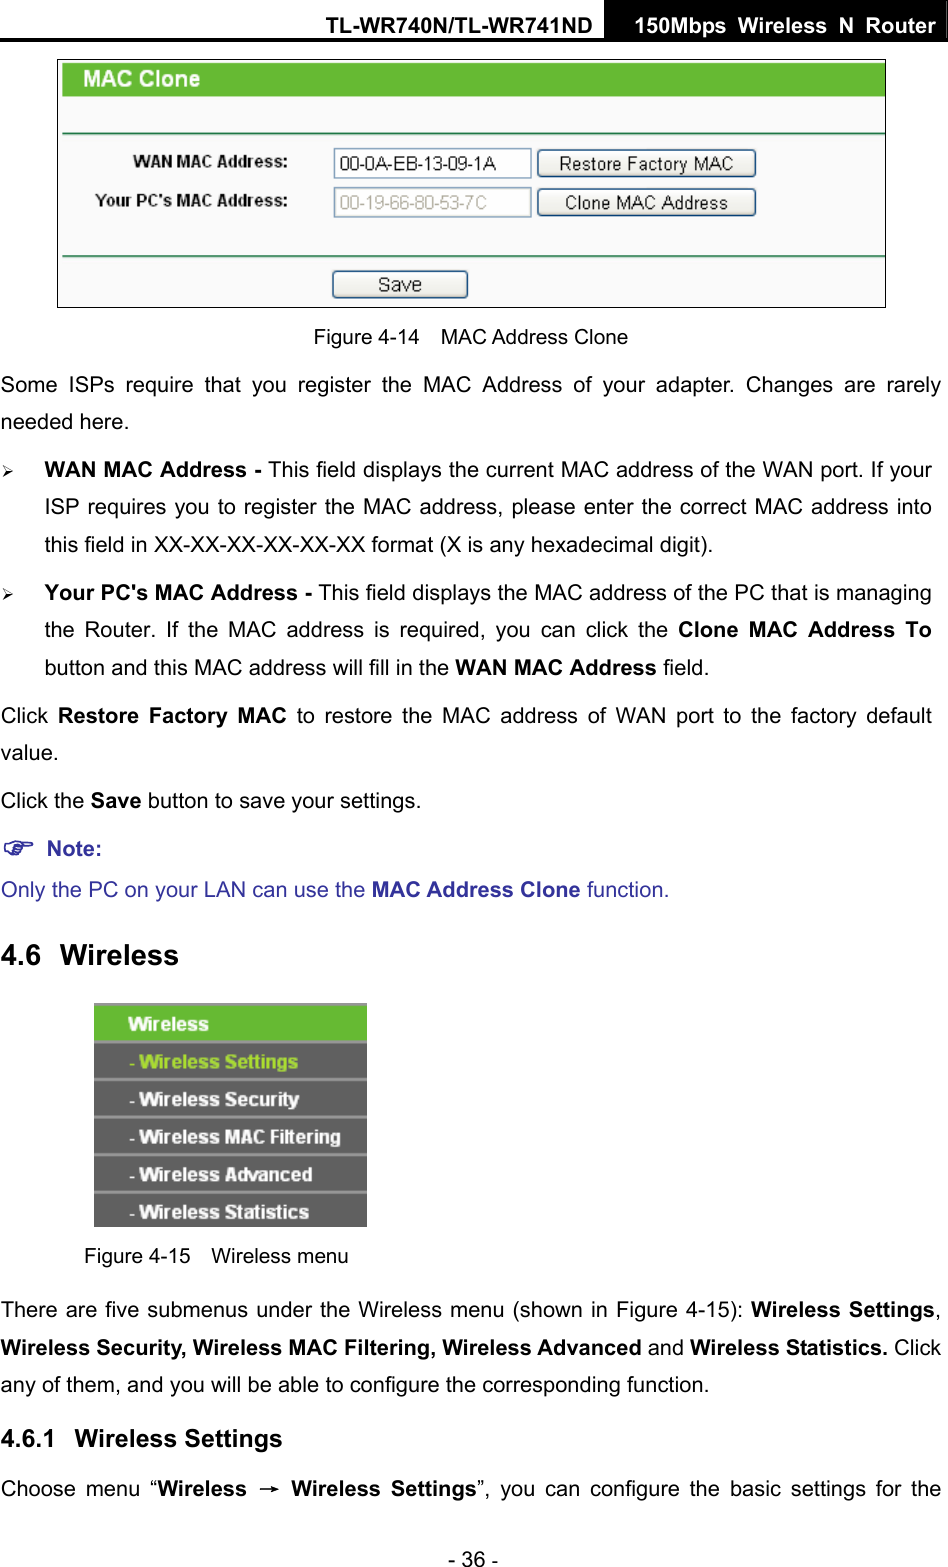 TL-WR740N/TL-WR741ND 150Mbps Wireless N Router - 36 -  Figure 4-14  MAC Address Clone Some ISPs require that you register the MAC Address of your adapter. Changes are rarely needed here. ¾ WAN MAC Address - This field displays the current MAC address of the WAN port. If your ISP requires you to register the MAC address, please enter the correct MAC address into this field in XX-XX-XX-XX-XX-XX format (X is any hexadecimal digit).   ¾ Your PC&apos;s MAC Address - This field displays the MAC address of the PC that is managing the Router. If the MAC address is required, you can click the Clone MAC Address To button and this MAC address will fill in the WAN MAC Address field. Click  Restore Factory MAC to restore the MAC address of WAN port to the factory default value. Click the Save button to save your settings. ) Note:  Only the PC on your LAN can use the MAC Address Clone function. 4.6  Wireless  Figure 4-15  Wireless menu There are five submenus under the Wireless menu (shown in Figure 4-15): Wireless Settings, Wireless Security, Wireless MAC Filtering, Wireless Advanced and Wireless Statistics. Click any of them, and you will be able to configure the corresponding function.   4.6.1  Wireless Settings Choose menu “Wireless  → Wireless Settings”, you can configure the basic settings for the 